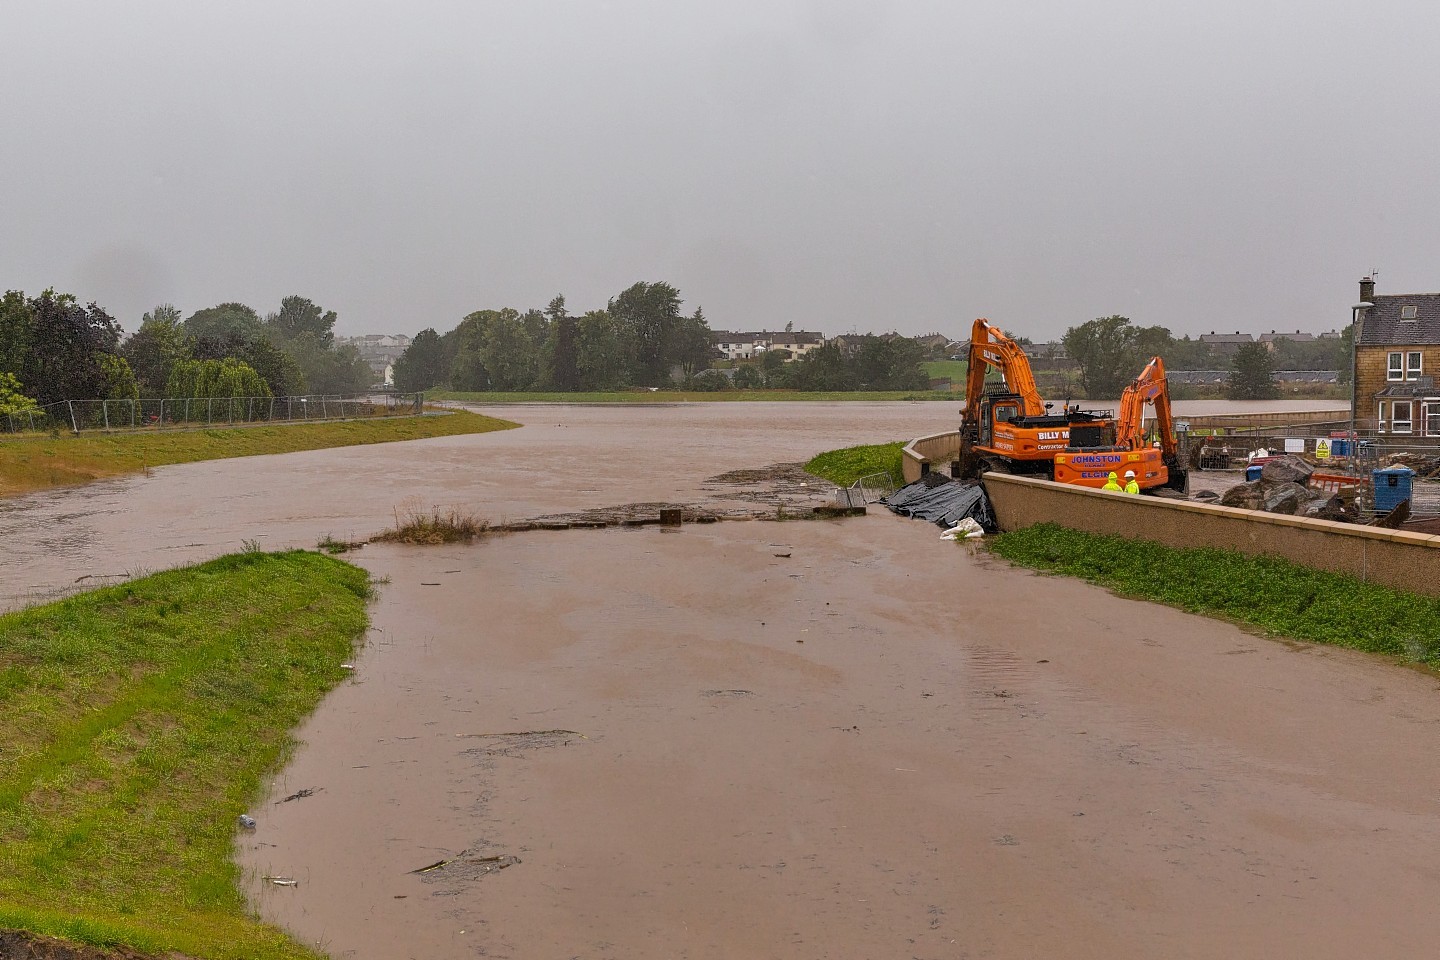 Flooding has caused major problems across Moray this morning. Pic credit: Jasper Image